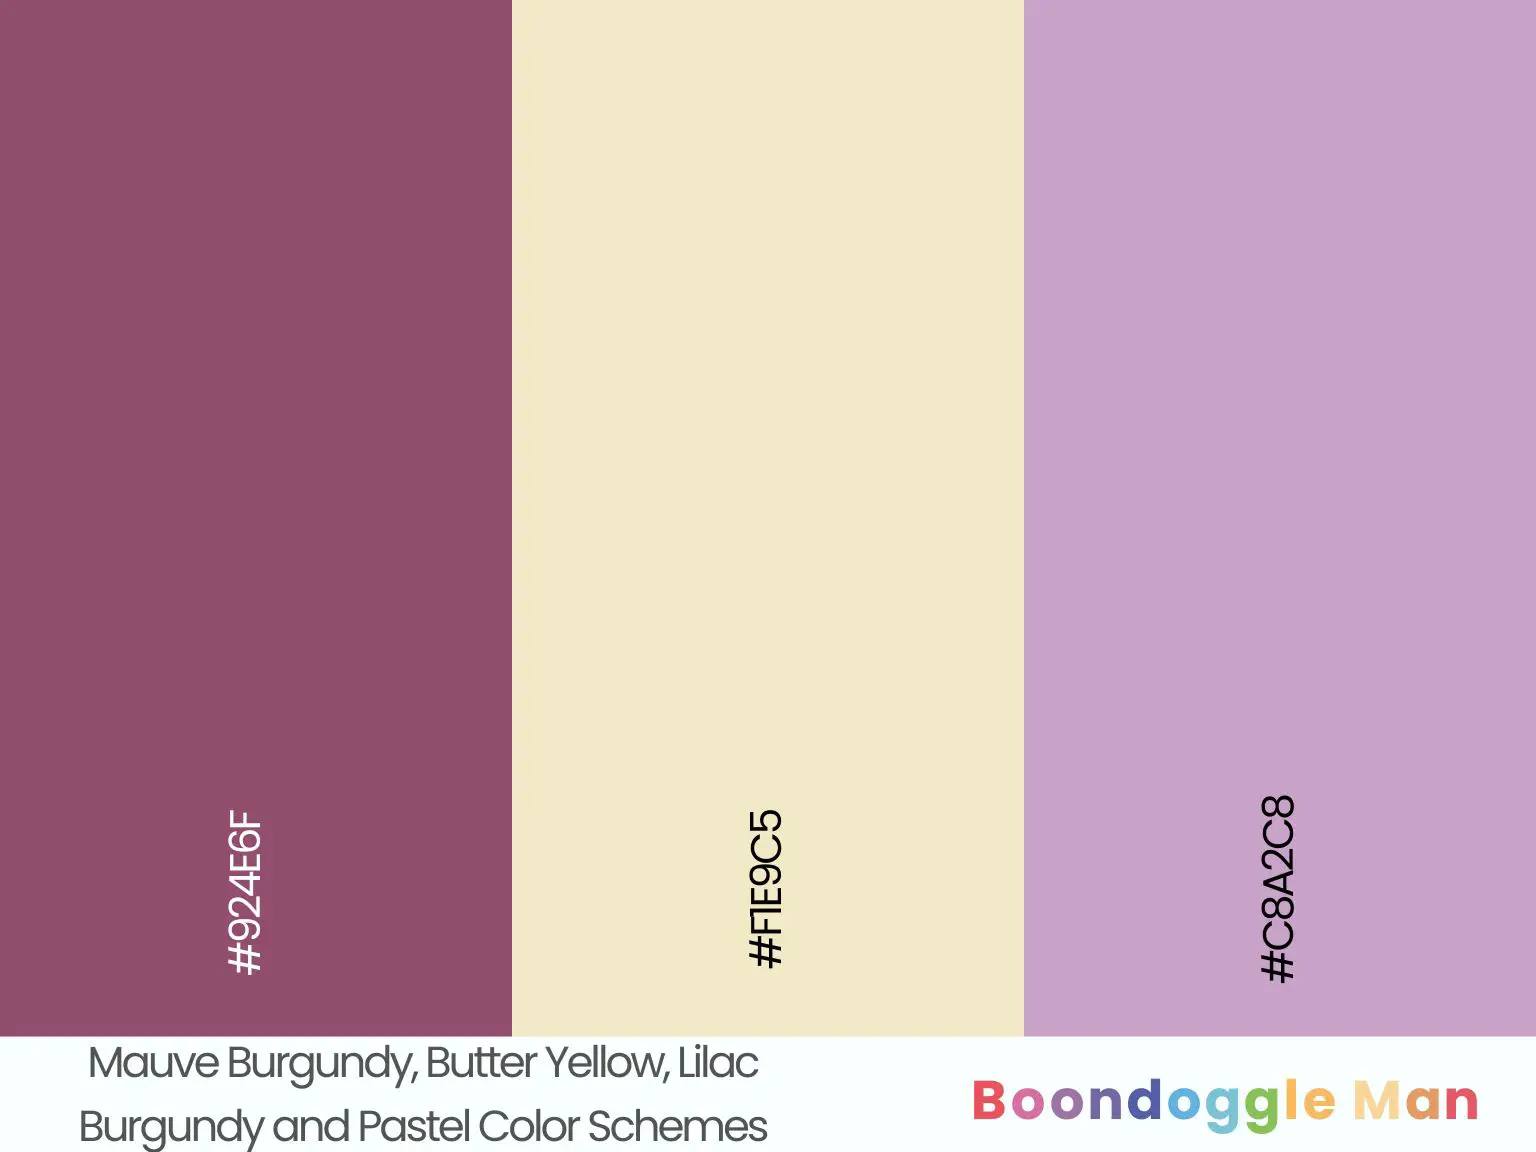 Mauve Burgundy, Butter Yellow, Lilac